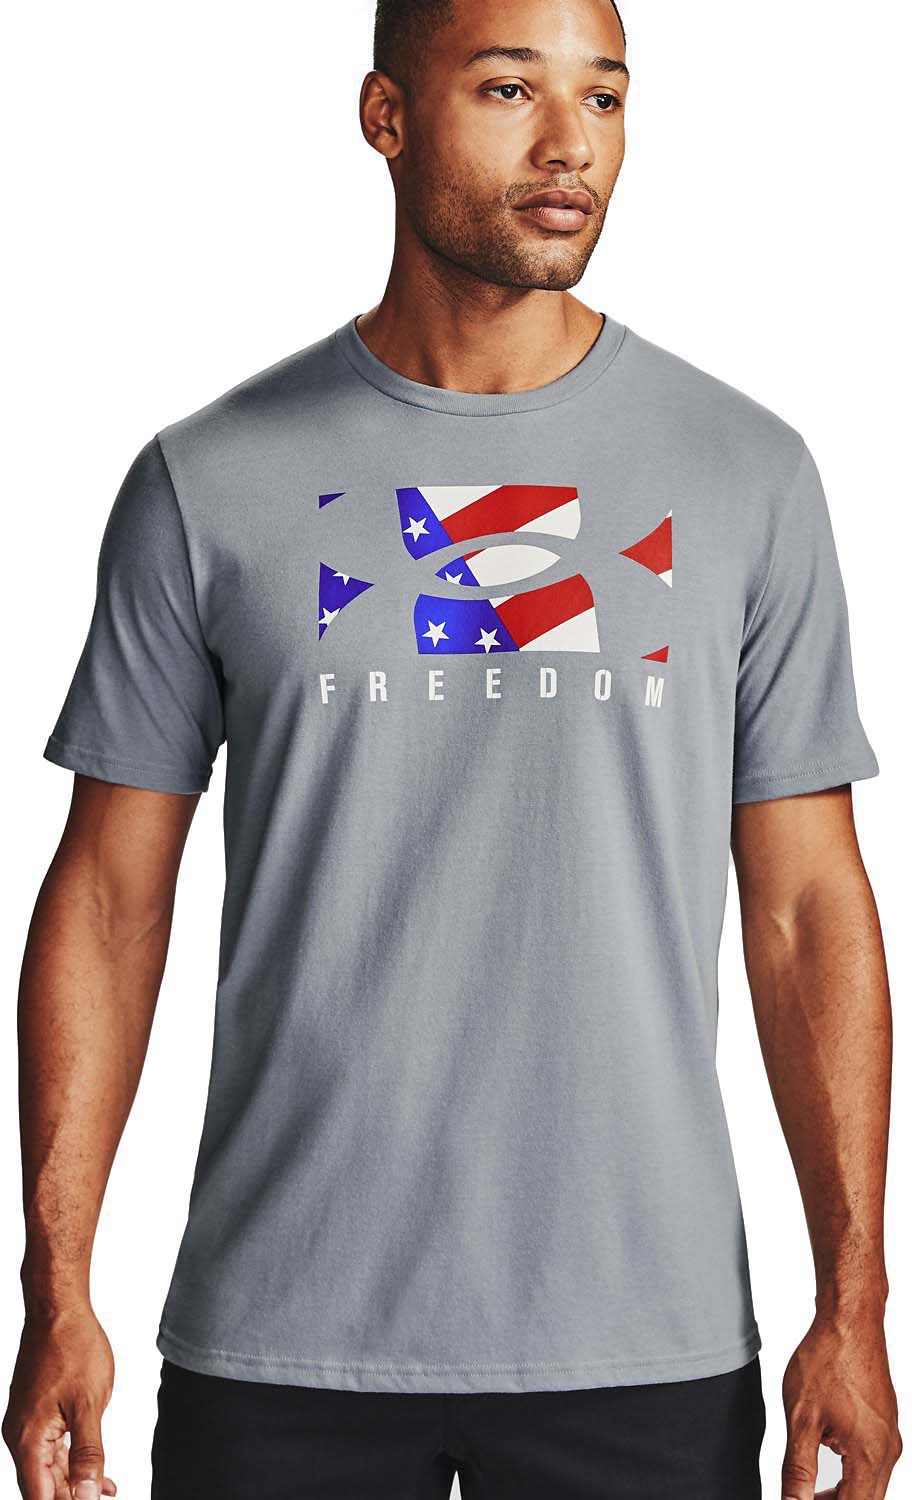 Under Armour Mens New Freedom Bfl T-Shirt 